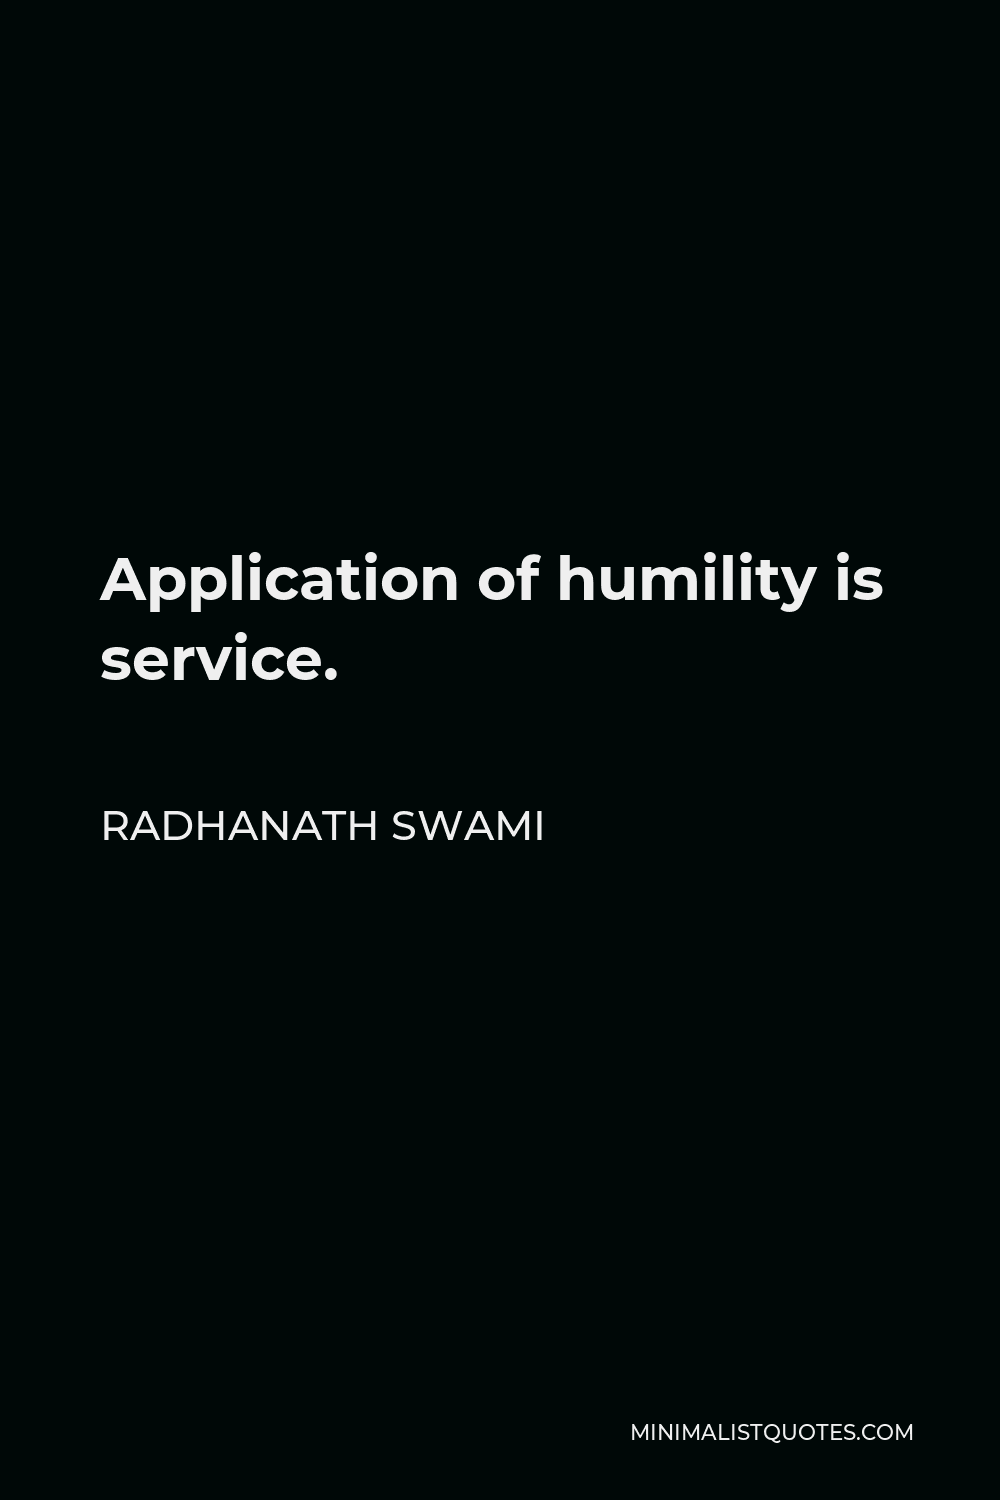 Radhanath Swami Quote - Application of humility is service.